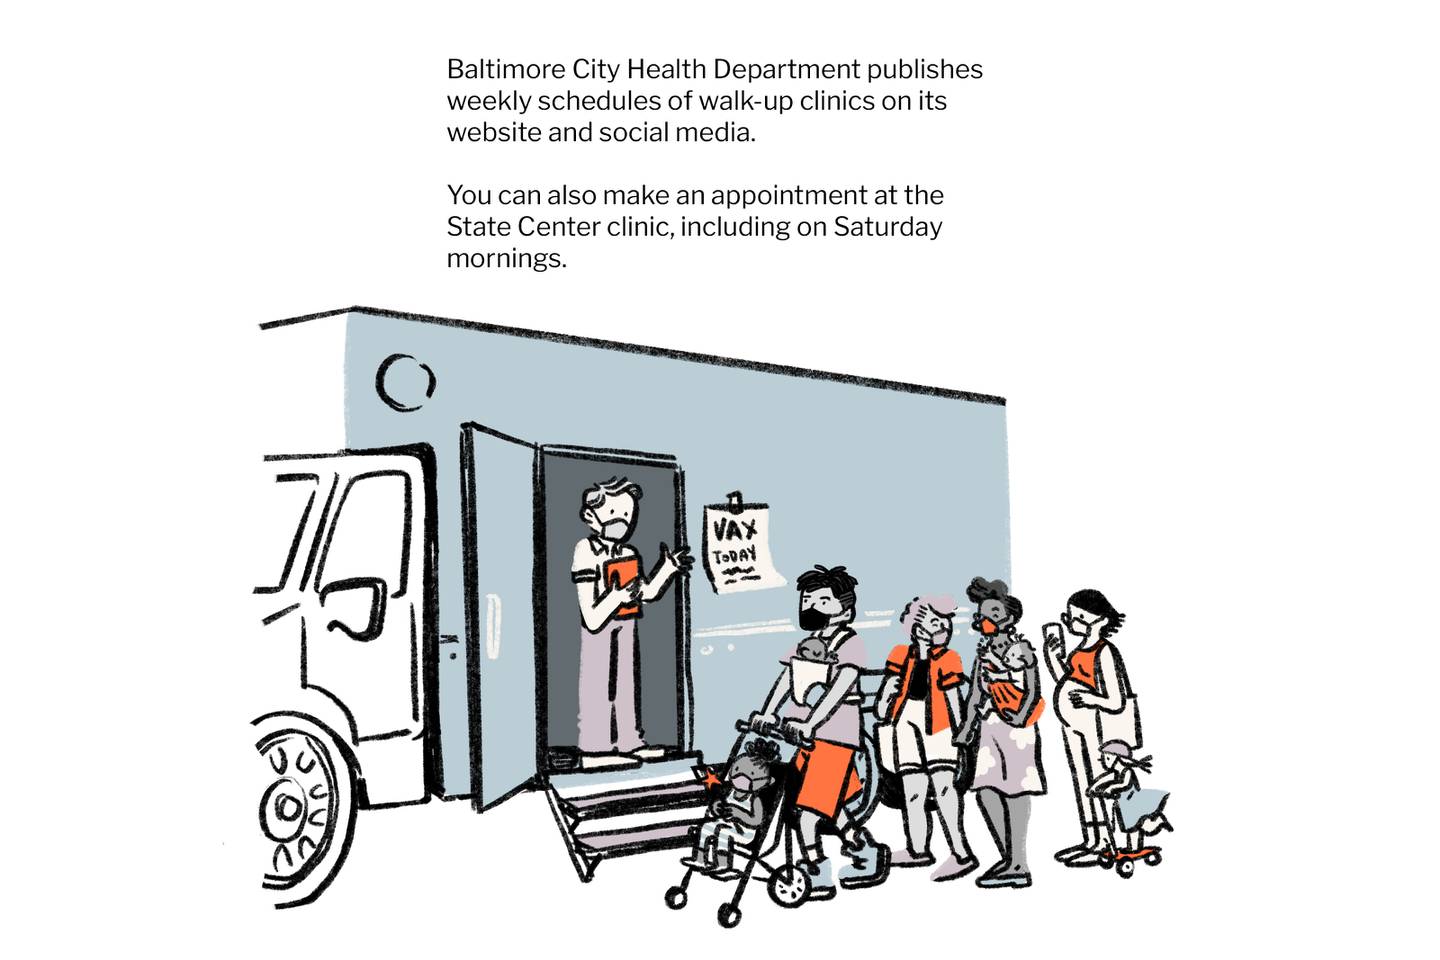 Baltimore City Health Department publishes weekly schedules of walk-up vaccine clinics on their website and social media.